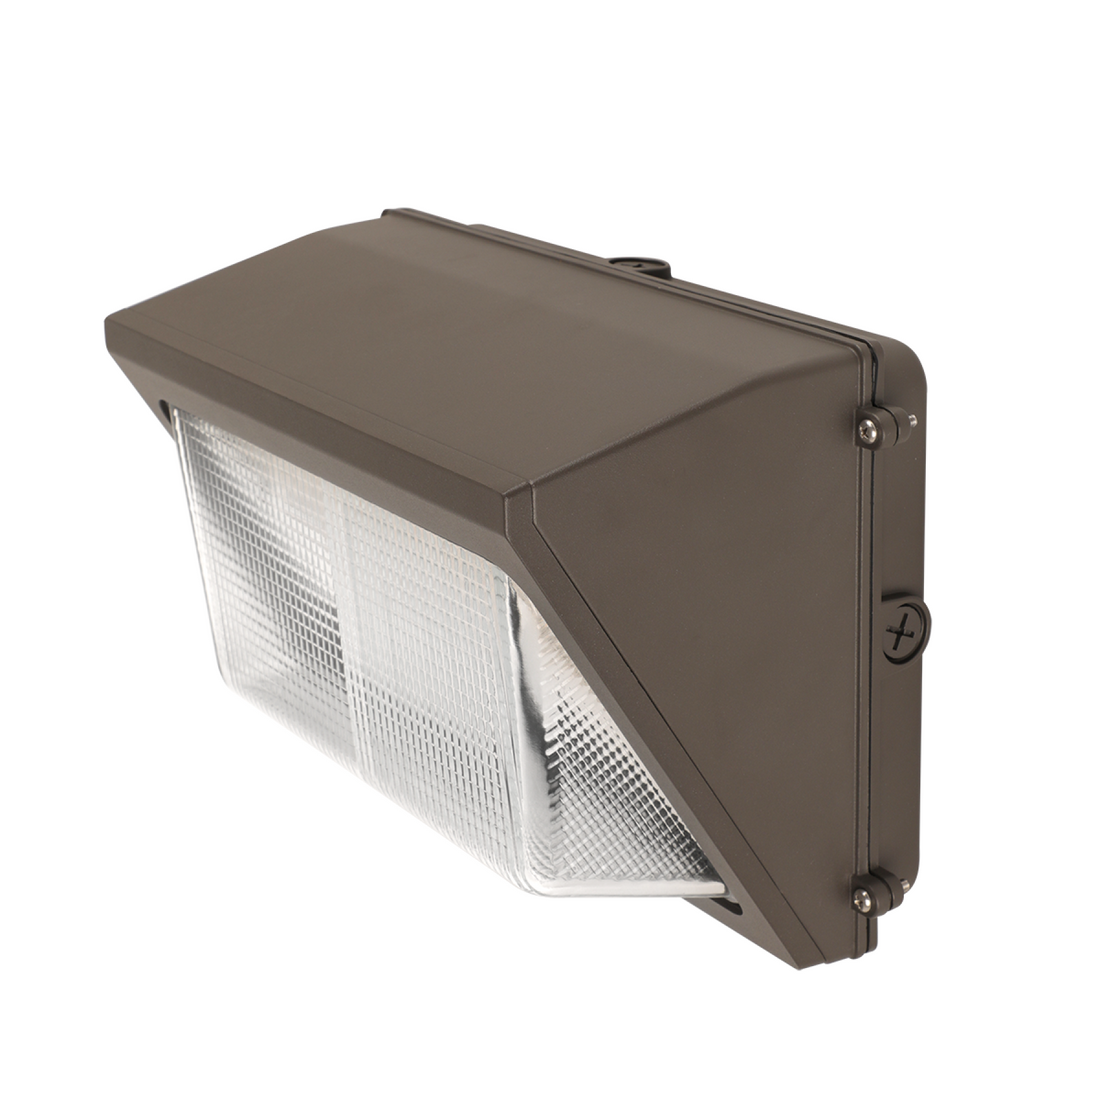 LED Wall Pack with Photocell - 45W/60W/75W Wattage Adjustable - 3000K/4000K/5000K Color Changeable - 120-277VAC -  0-10V Dimmable - UL Listed - 5 Years Warranty